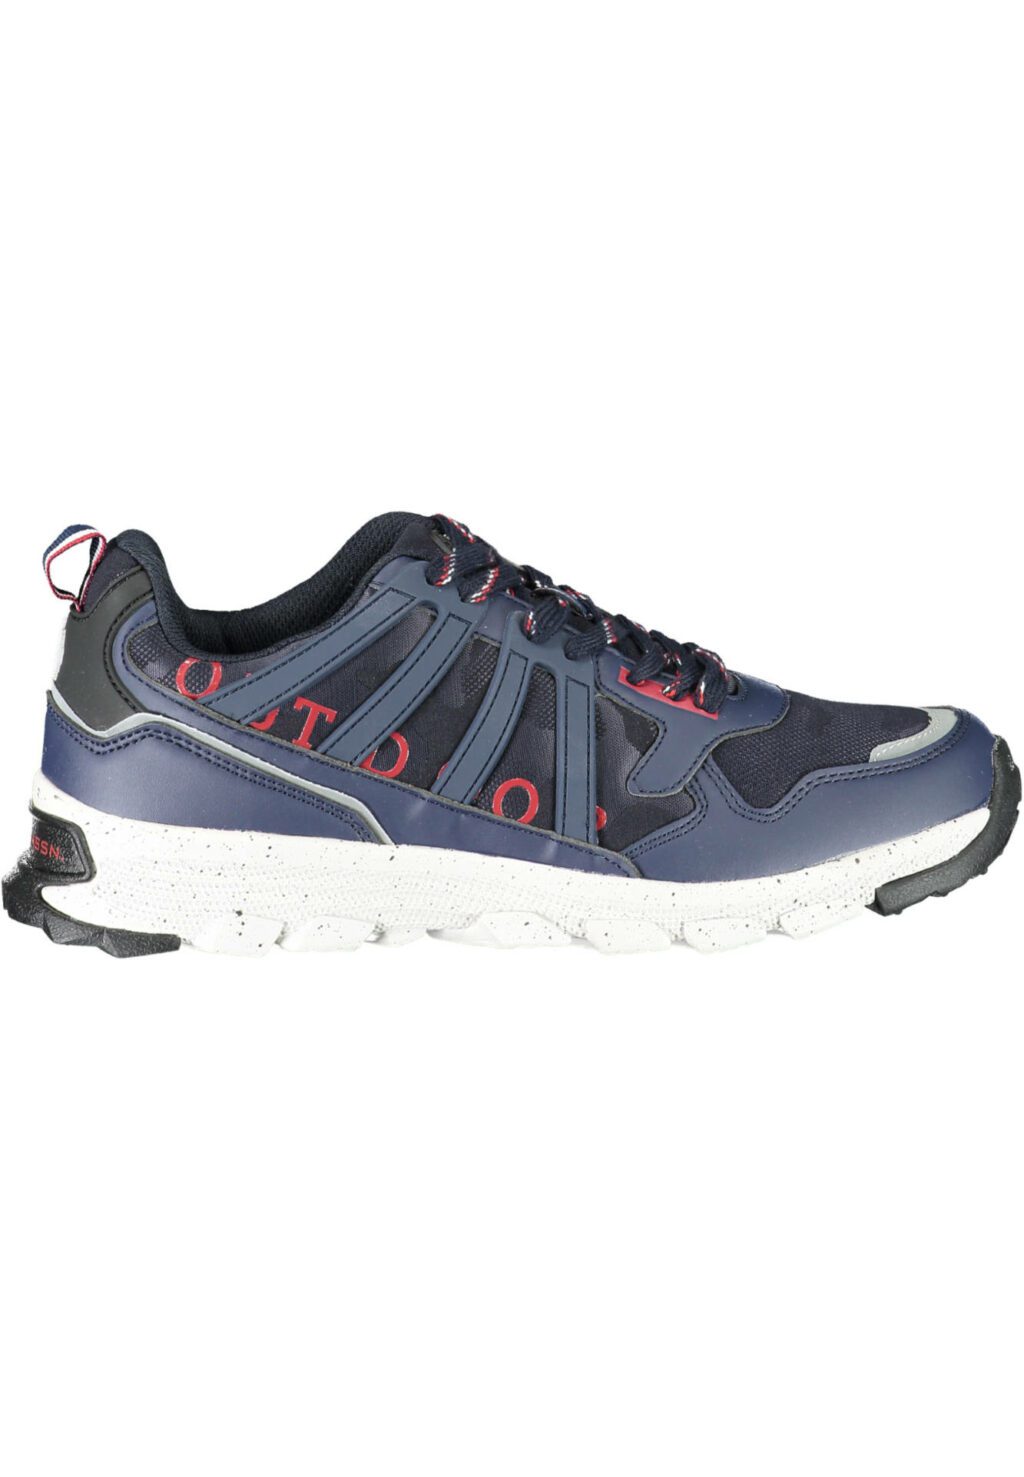 US POLO ASSN. BLUE MEN'S SPORTS SHOES ARCY001MAYT1_BLU_DBL002